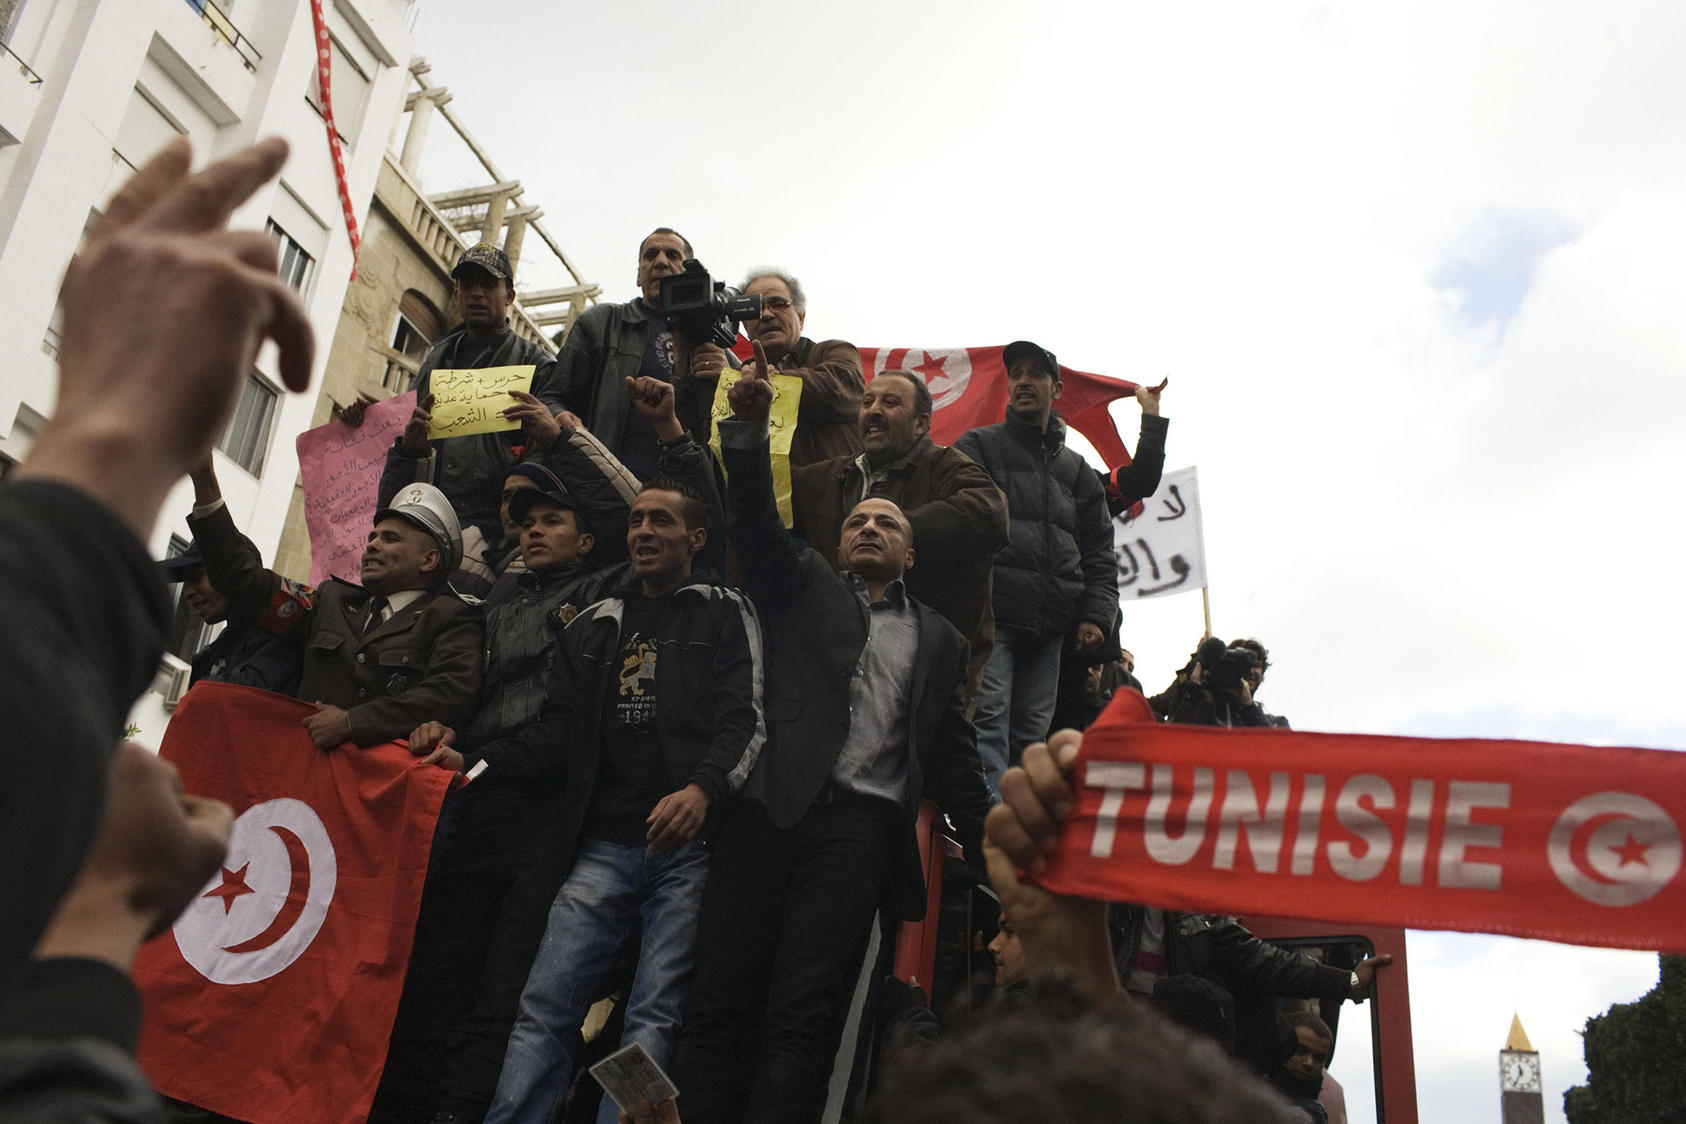 Officers of Tunis' central artery, Avenue Bourguiba, organize a protest in Tunis, Tunisia, Jan. 22, 2011. (Moises Saman/The New York Times)